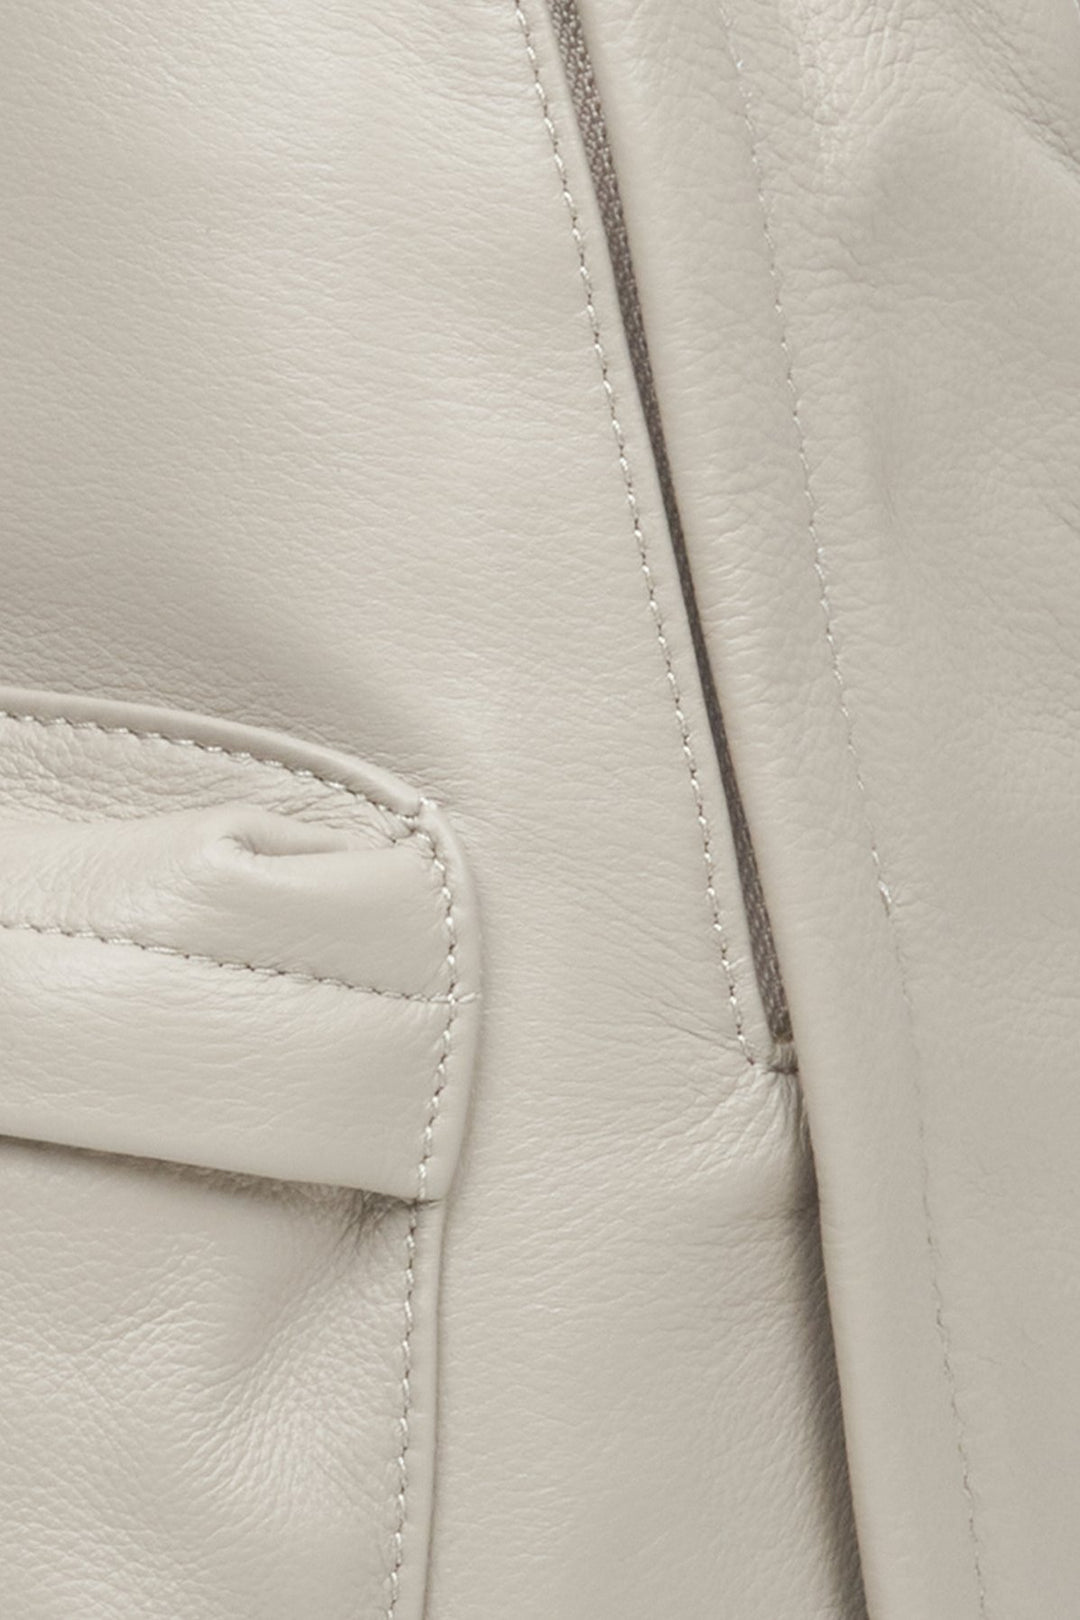 Large women's light grey backpack made of genuine leather by Estro - close-up of the details.